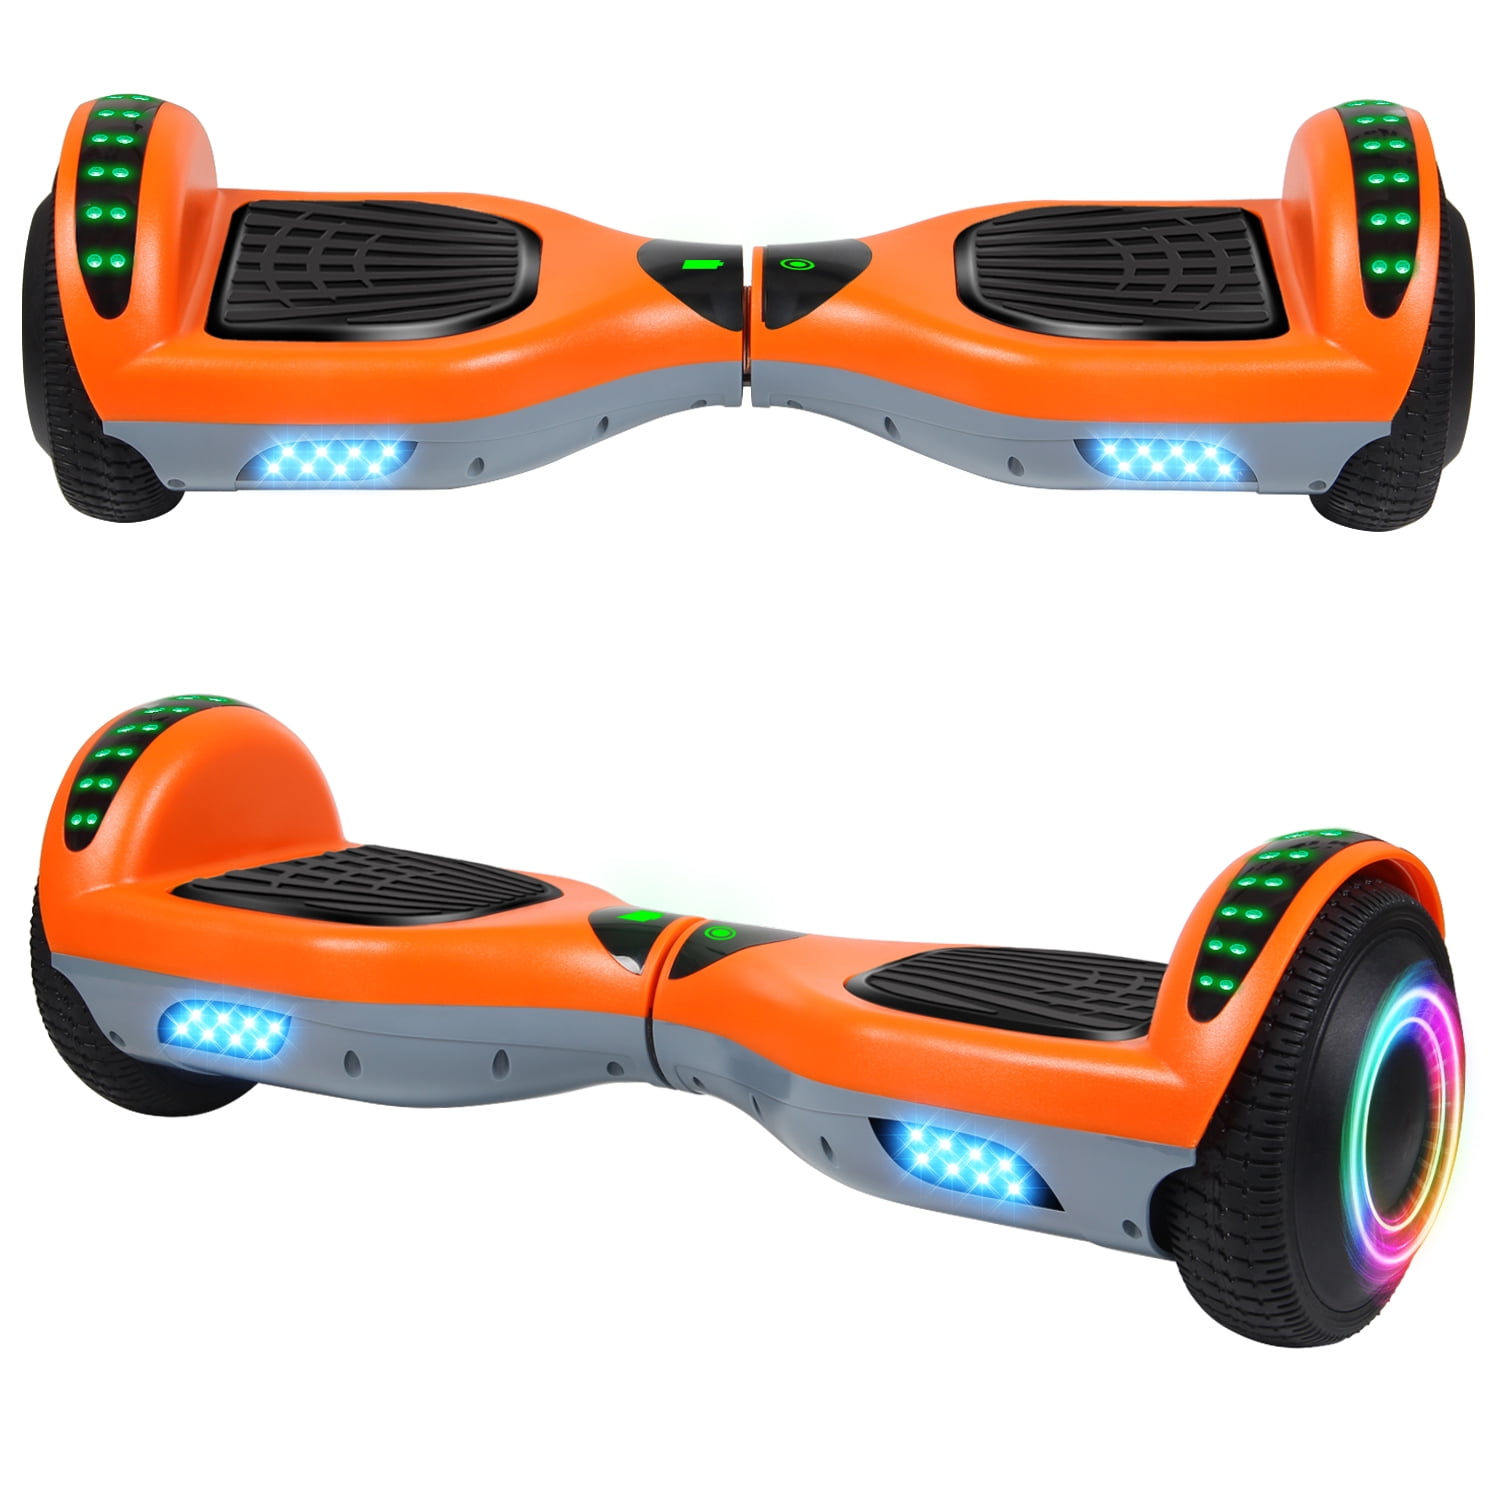 Sisigad 6 5 Two Wheel Self Balancing Hoverboard With Bluetooth And Led Lights Electric Scooter